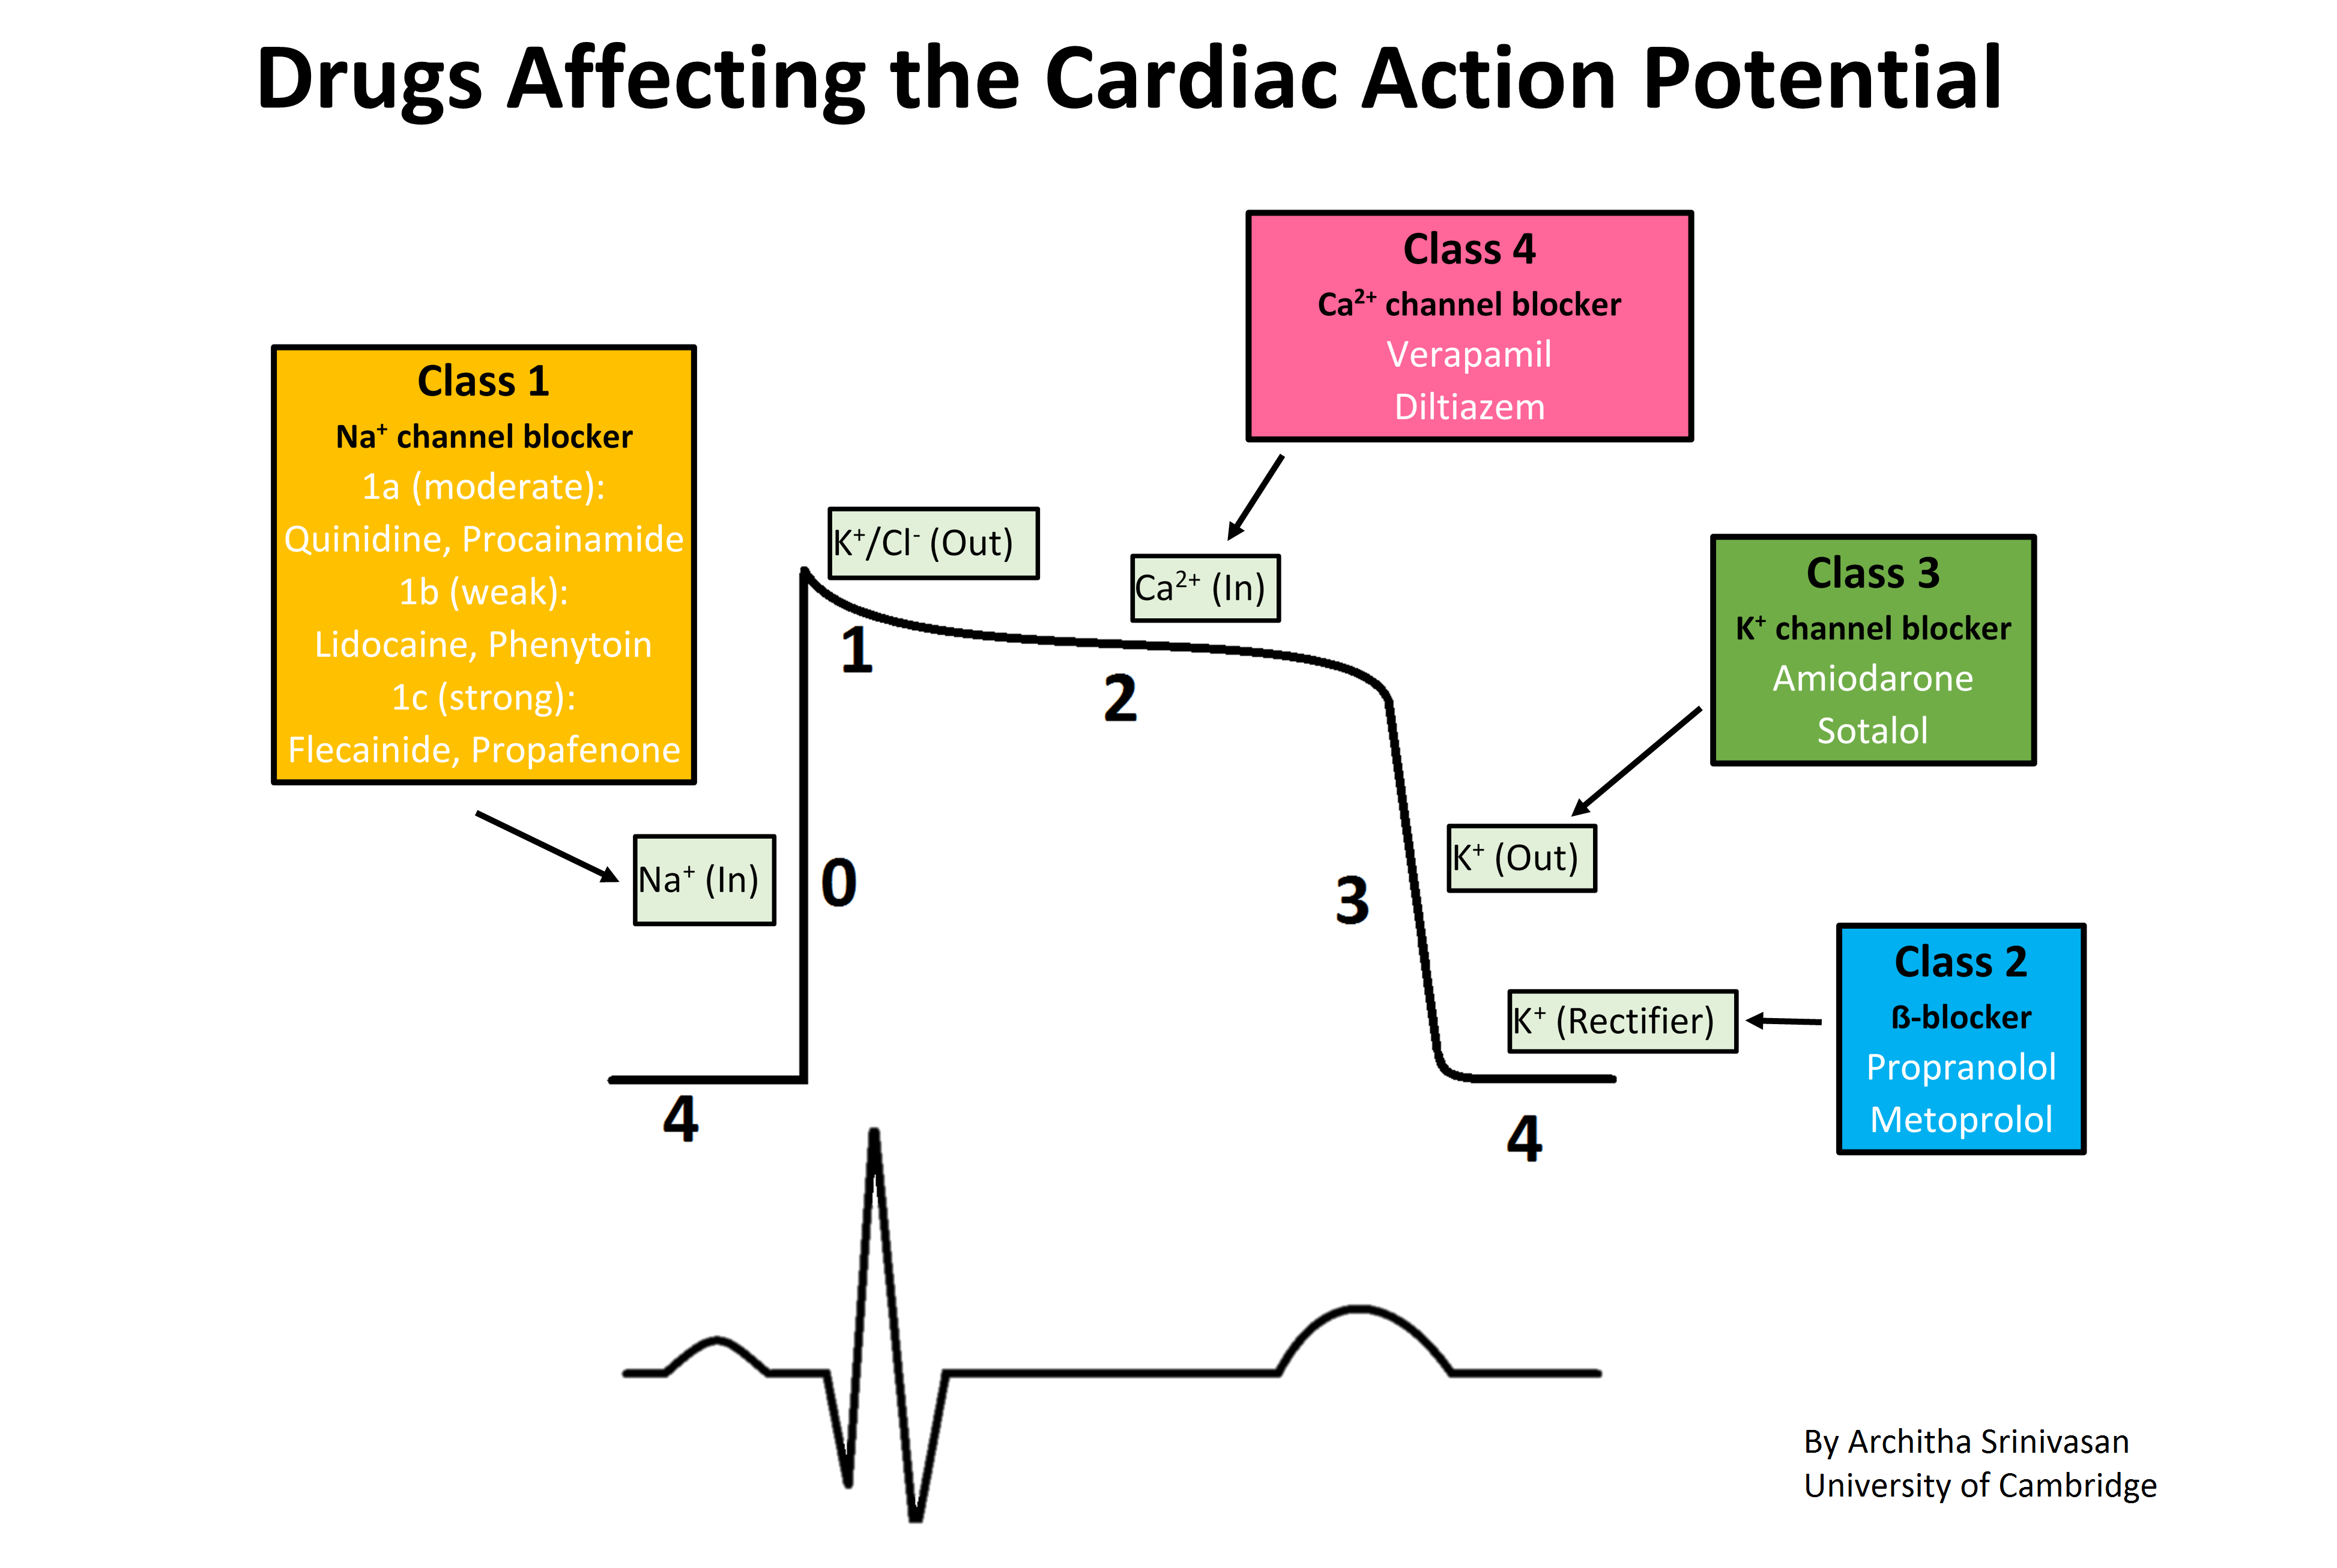 Drugs affecting the cardiac action potential